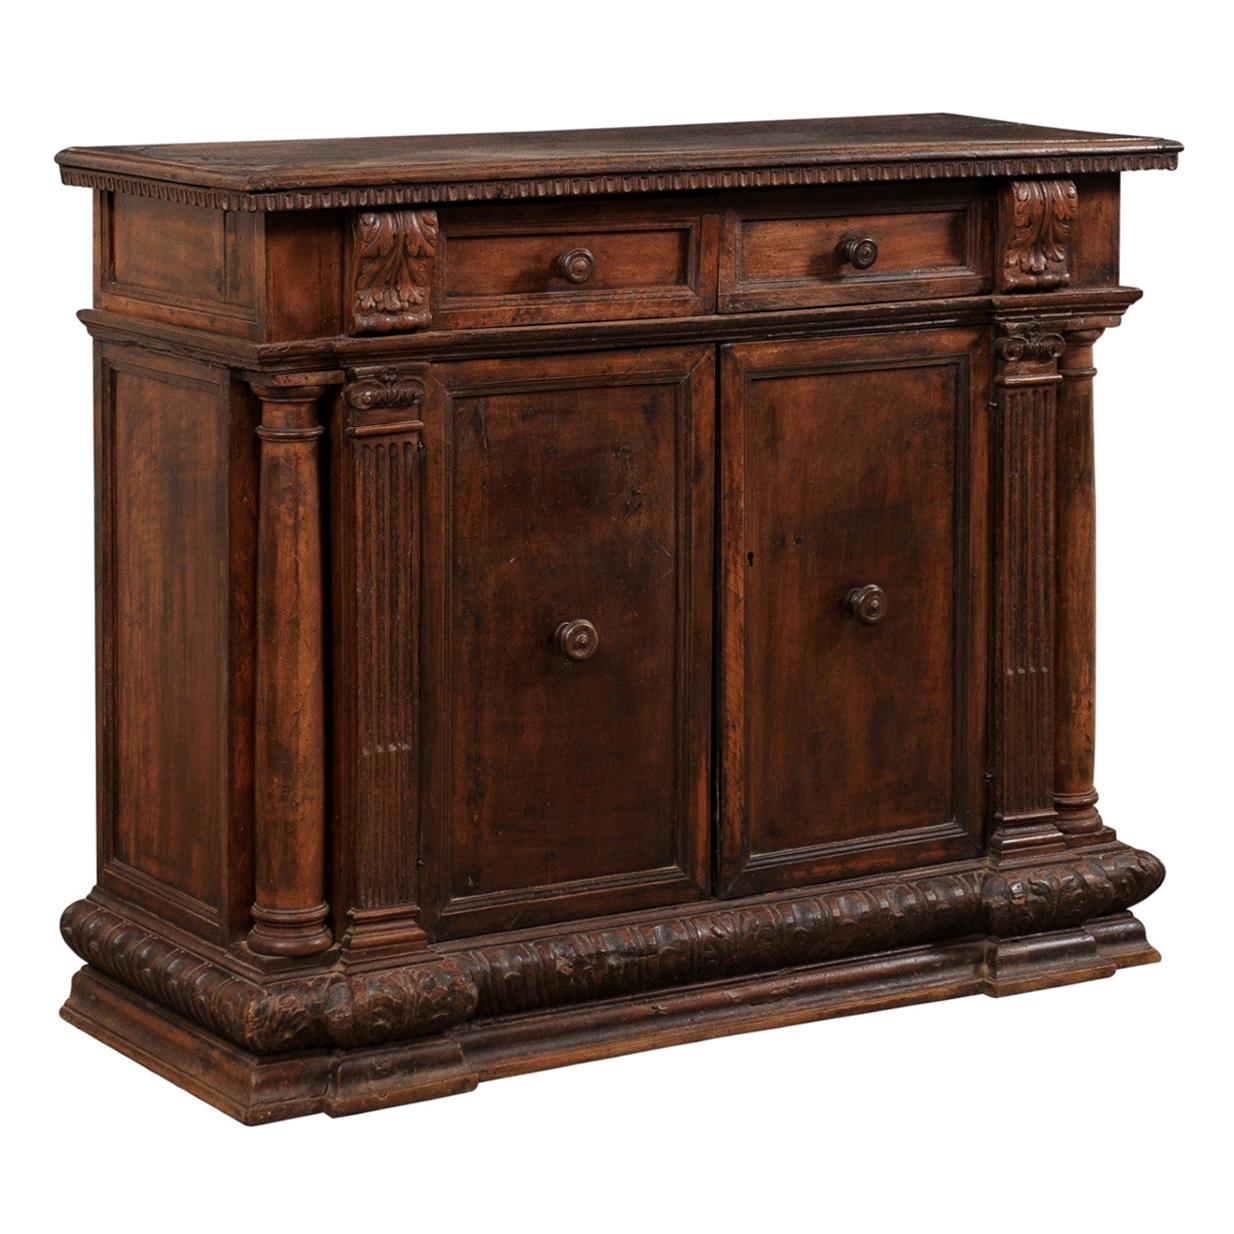 Italian Early 19th C. Walnut Cabinet with Carved Column & Pilaster Accents